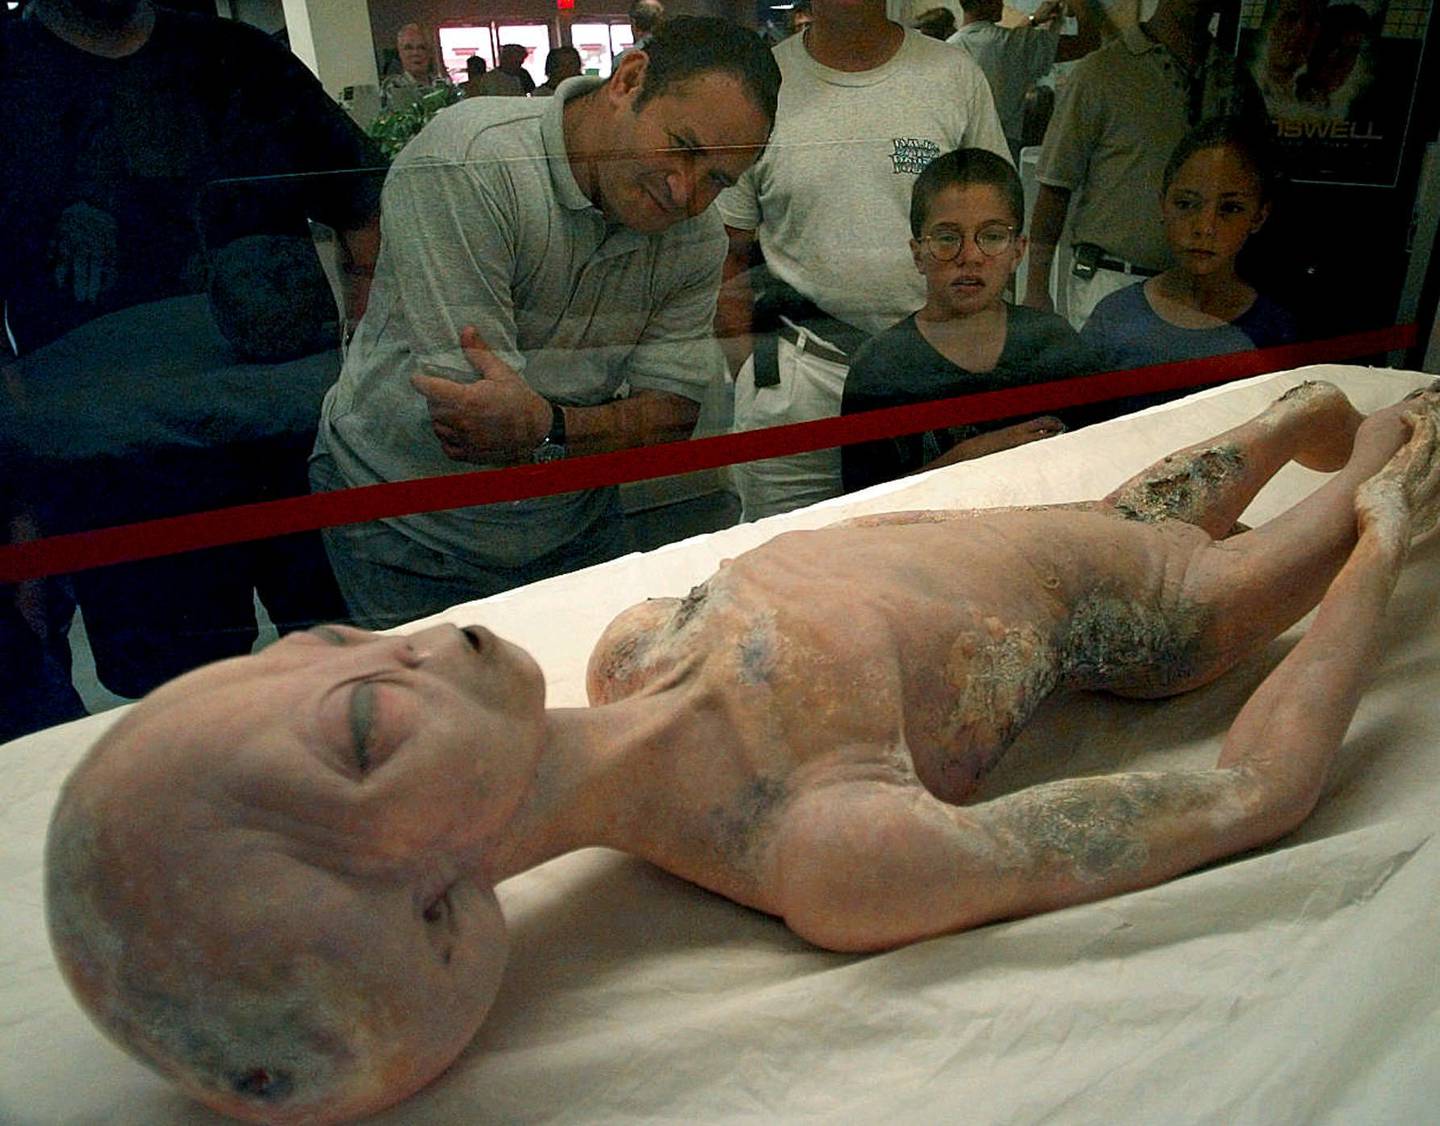 Visitors to the International UFO Museum in Roswell, New Mexico examine a glass-encased alien prop used in the movie "Roswell" Wednesday, July 2, 1997. Over 2,000 visitors walked through the museum Monday as tourists began to pour into town for the 50th anniversary of the Roswell incident. (AP Photo/Susan Sterner)